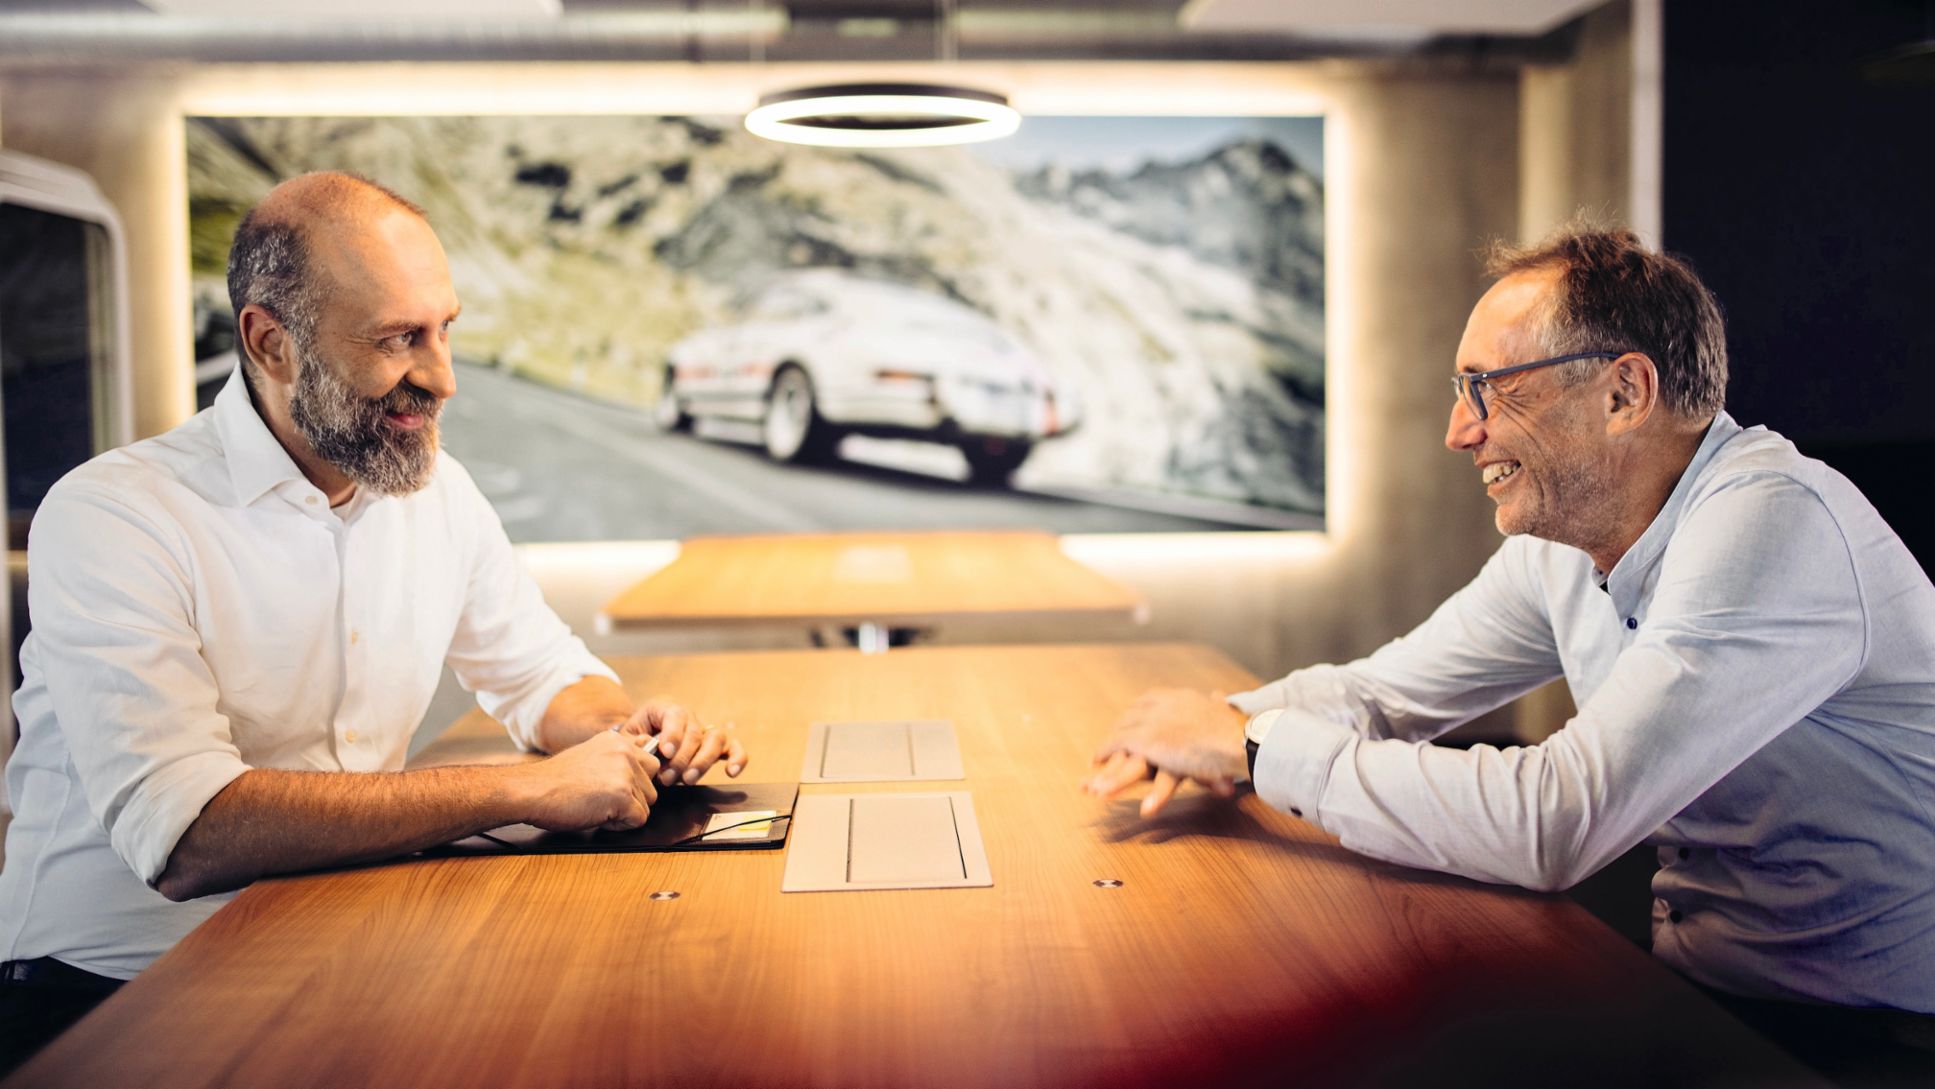 Federico Magno, Member of the Executive Board of the management and IT consultancy MHP, from July CEO of MHP, Dirk Lappe, Chief Technology Officer of Porsche Engineering, 2024, Porsche AG